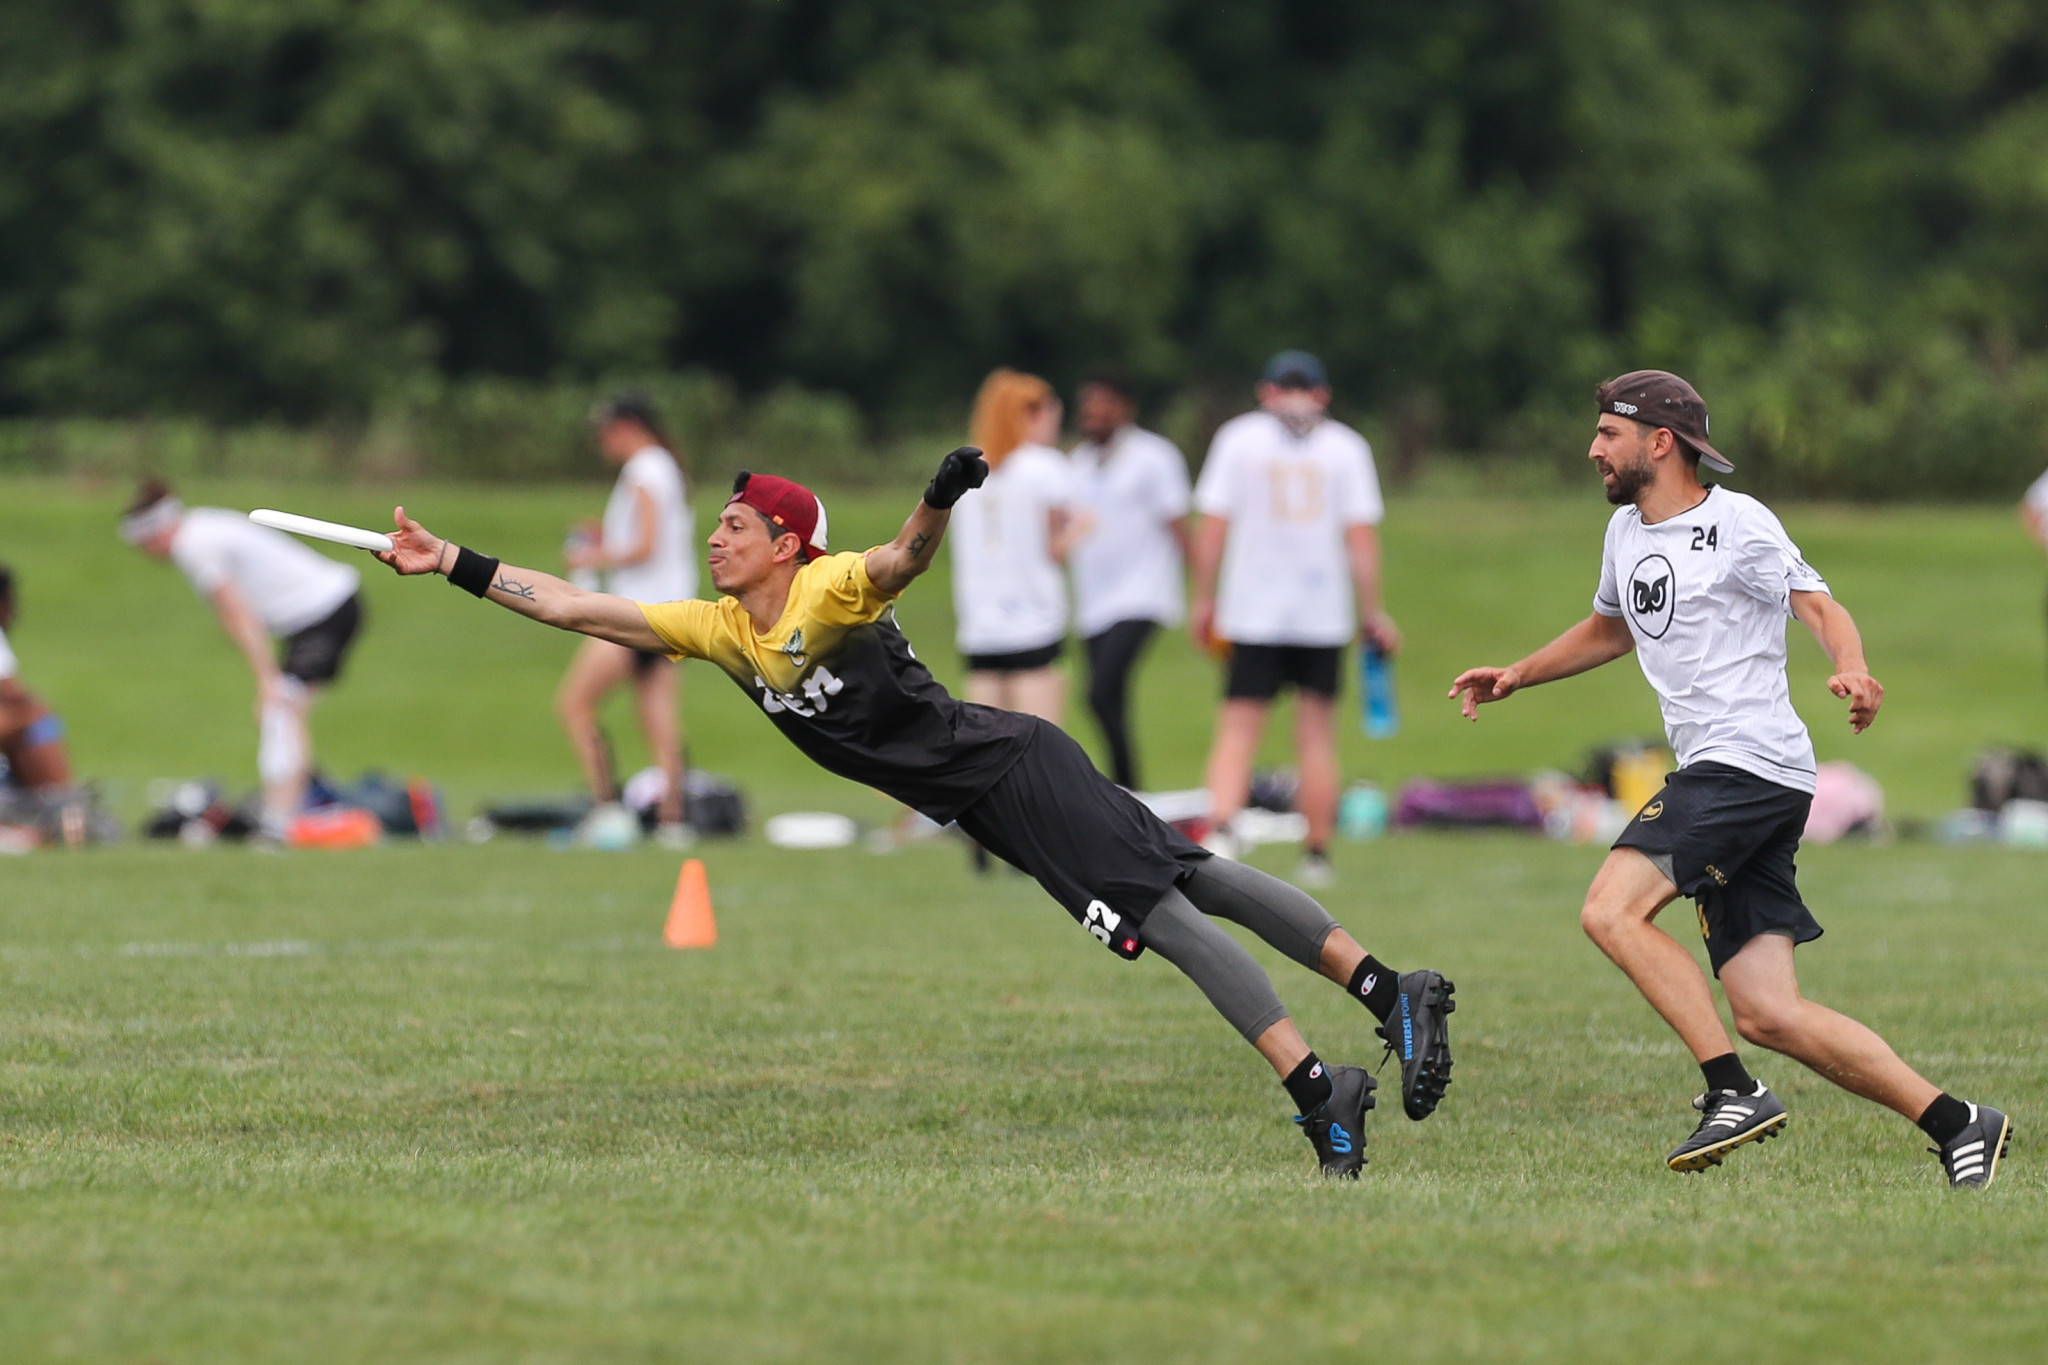 Wrocław in Poland staged the World Junior Ultimate Championships ©Paul Rutherford for UltiPhotos